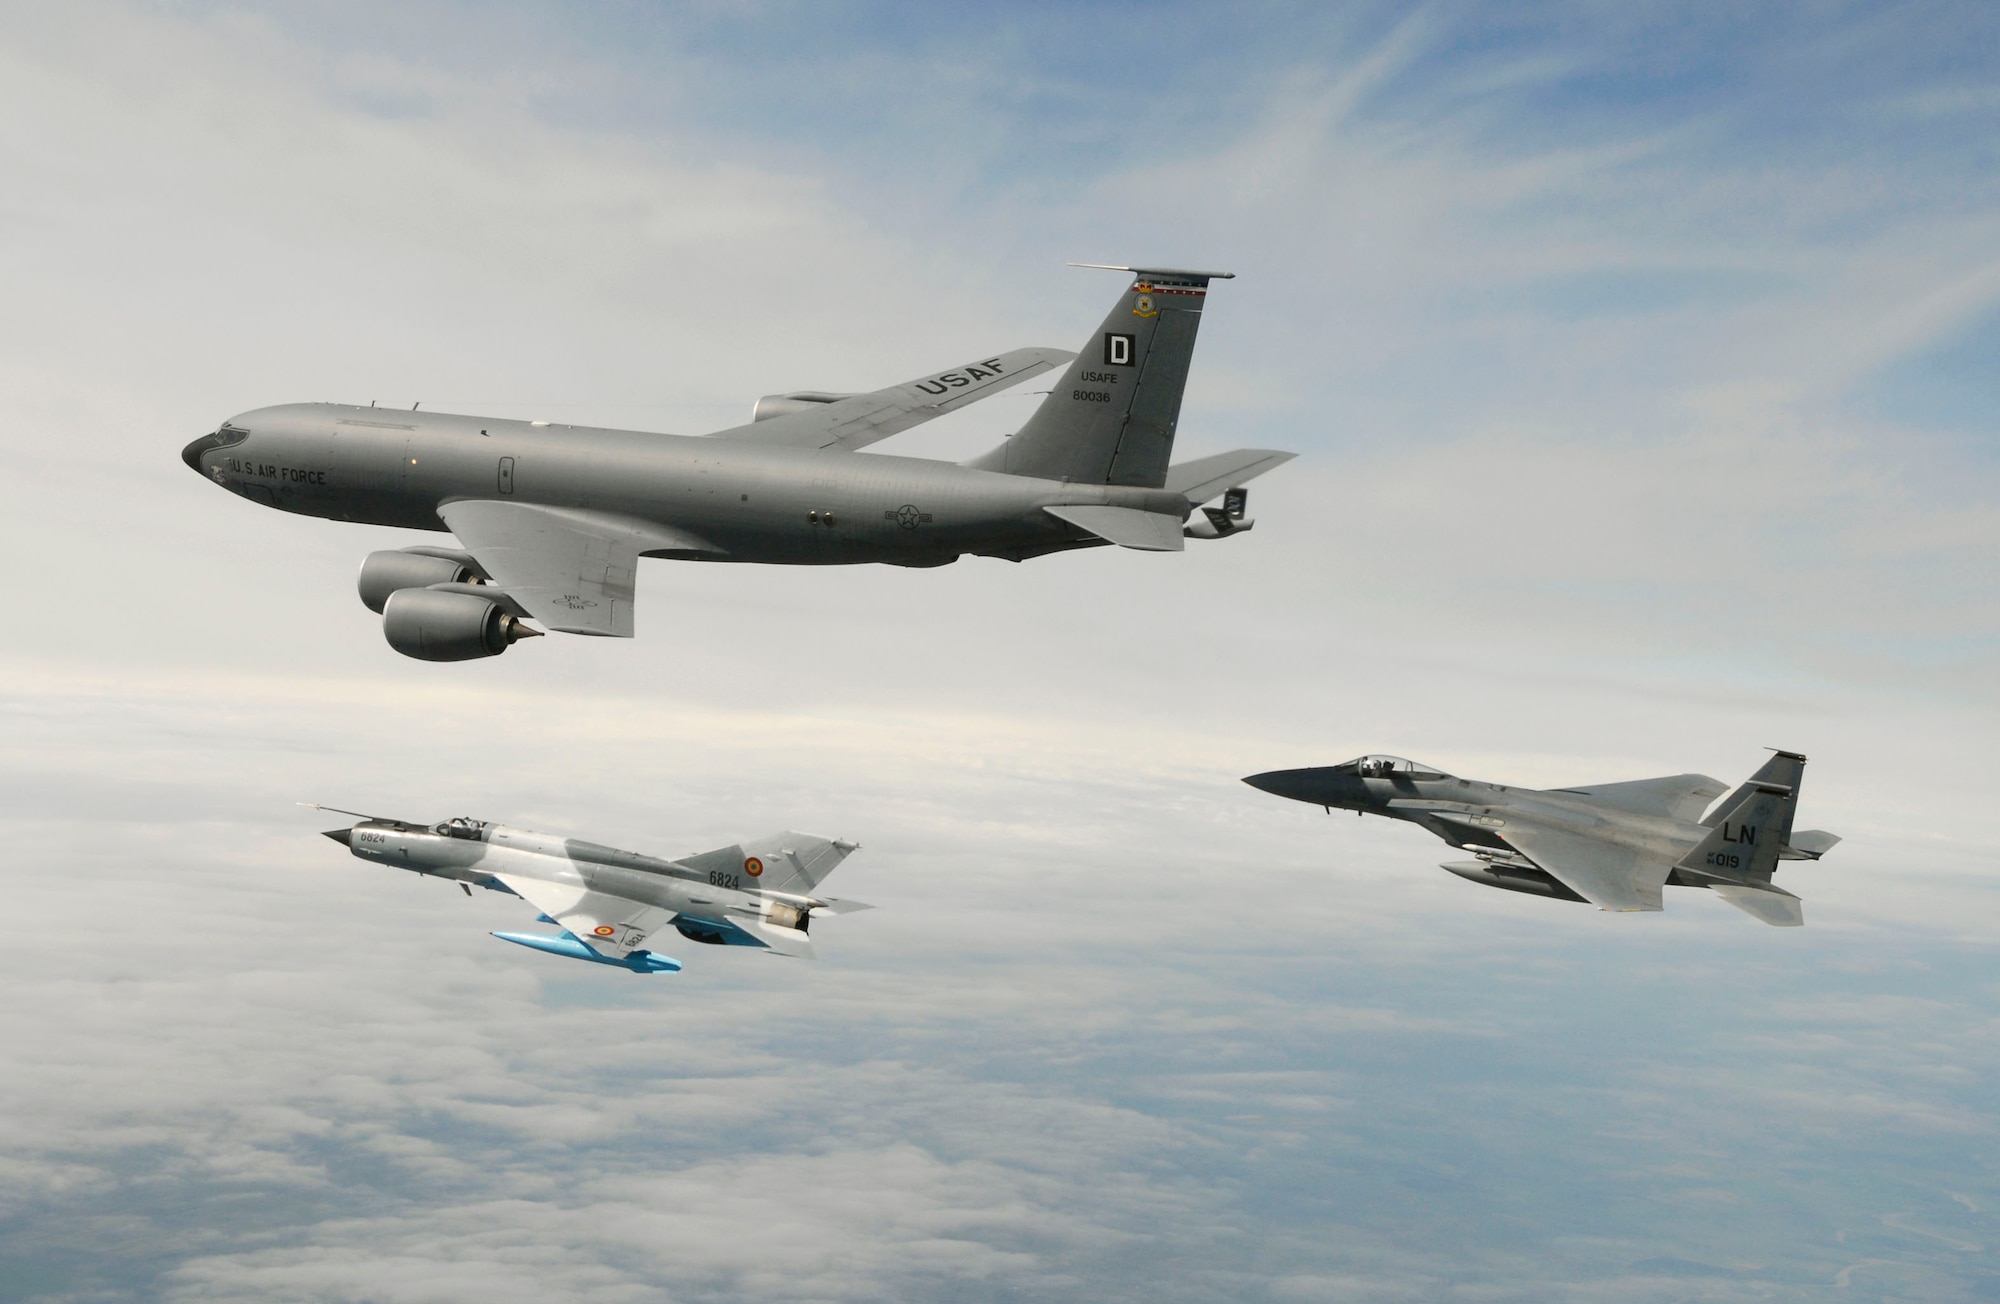 MIHAIL KOGALNICEANU, ROMANIA – 1st Lt. Andrew Weidner, an F-15 “Eagle” pilot assigned to the 493rd Fighter Squadron at RAF Lakenheath, and a Romanian MiG-21 fly along side a KC-135 “Stratotanker” from  RAF Mildenhall’s 351st Air Refueling Squadron during a training mission over Eastern Romania Wednesday.  More than 200 U.S. Air Forces in Europe Airmen, mostly from RAF Lakenheath and Mildenhall, are in Romania participating in Exercise Sniper Lance 2007.  “Sniper Lancer” is being staged out of Mihail Kogalniceanu Air Base near the Eastern Coast of Romania.  (Photo by Ben Bloker, European Stars & Stripes)